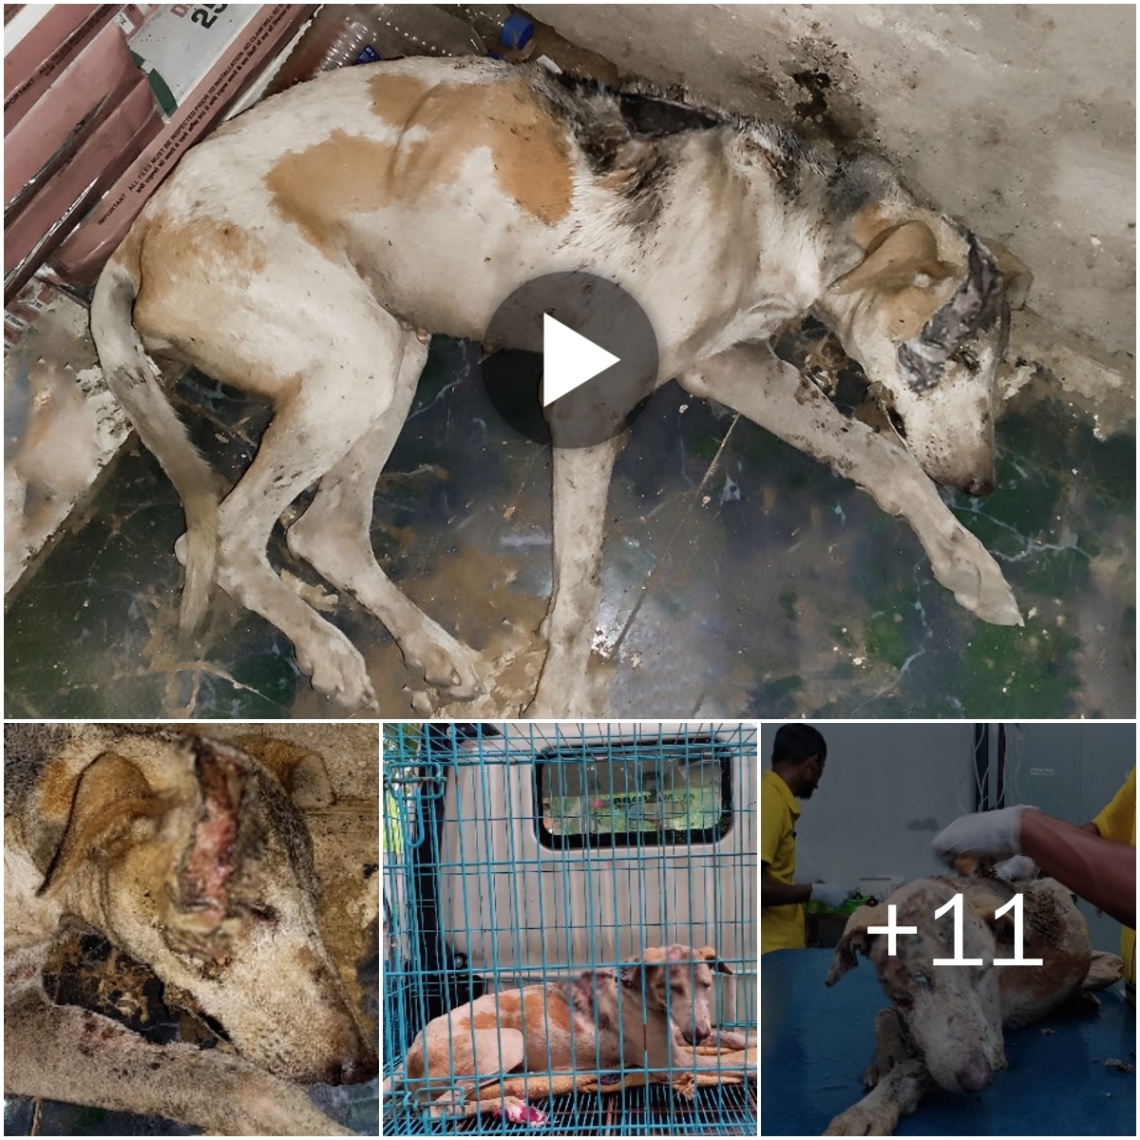 (Video) Saved a Dog Suffering from Severe Infections on Its Head and Back